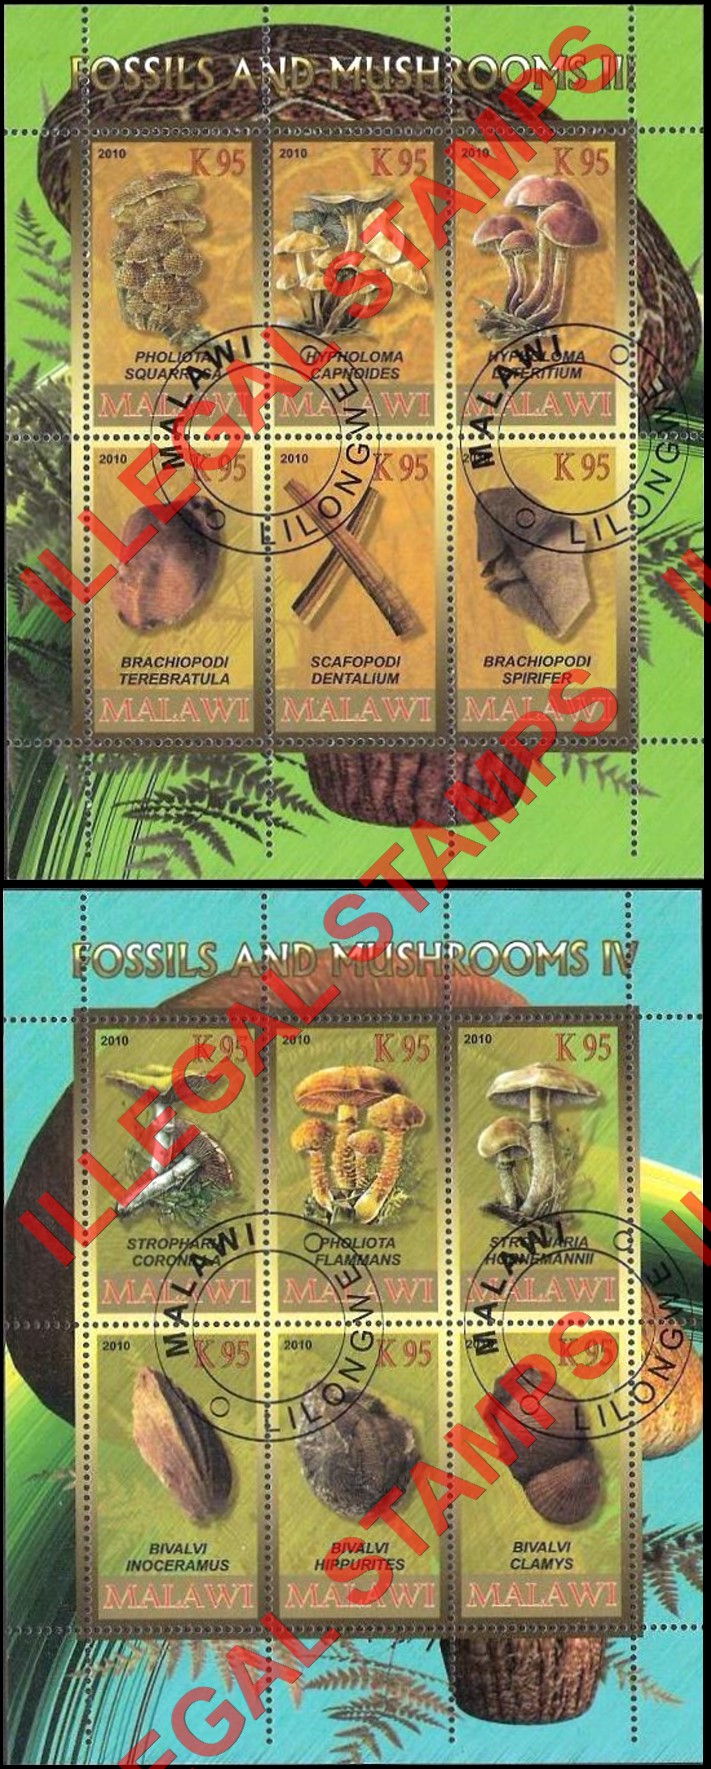 Malawi 2010 Fossils and Mushrooms Illegal Stamp Souvenir Sheets of 6 (Part 2)